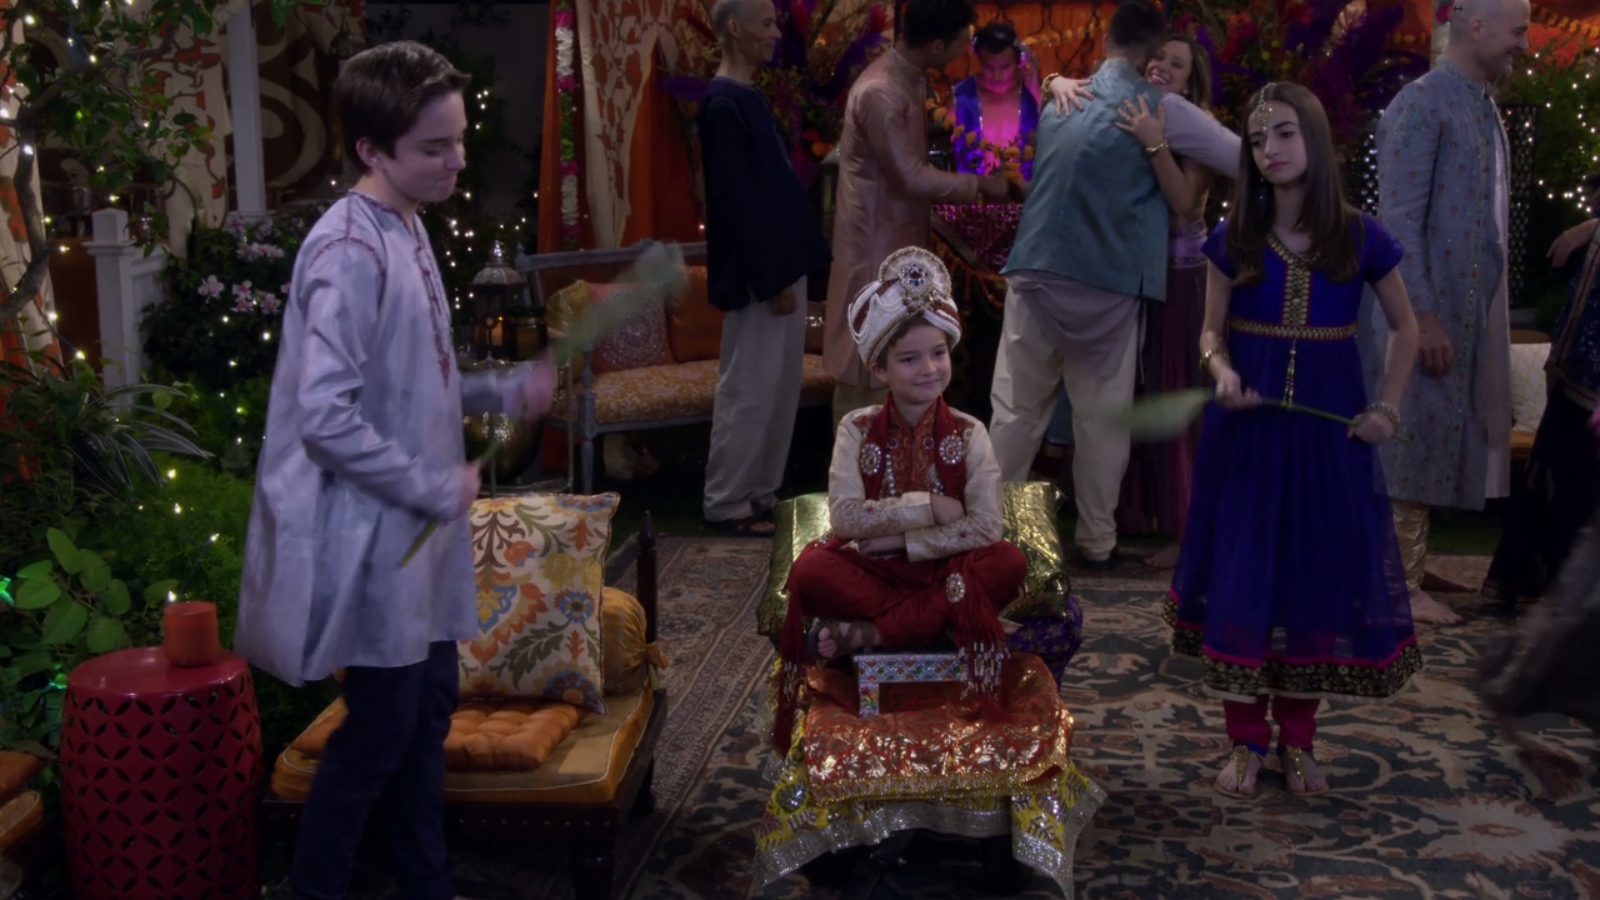 Michael Campion in Fuller House